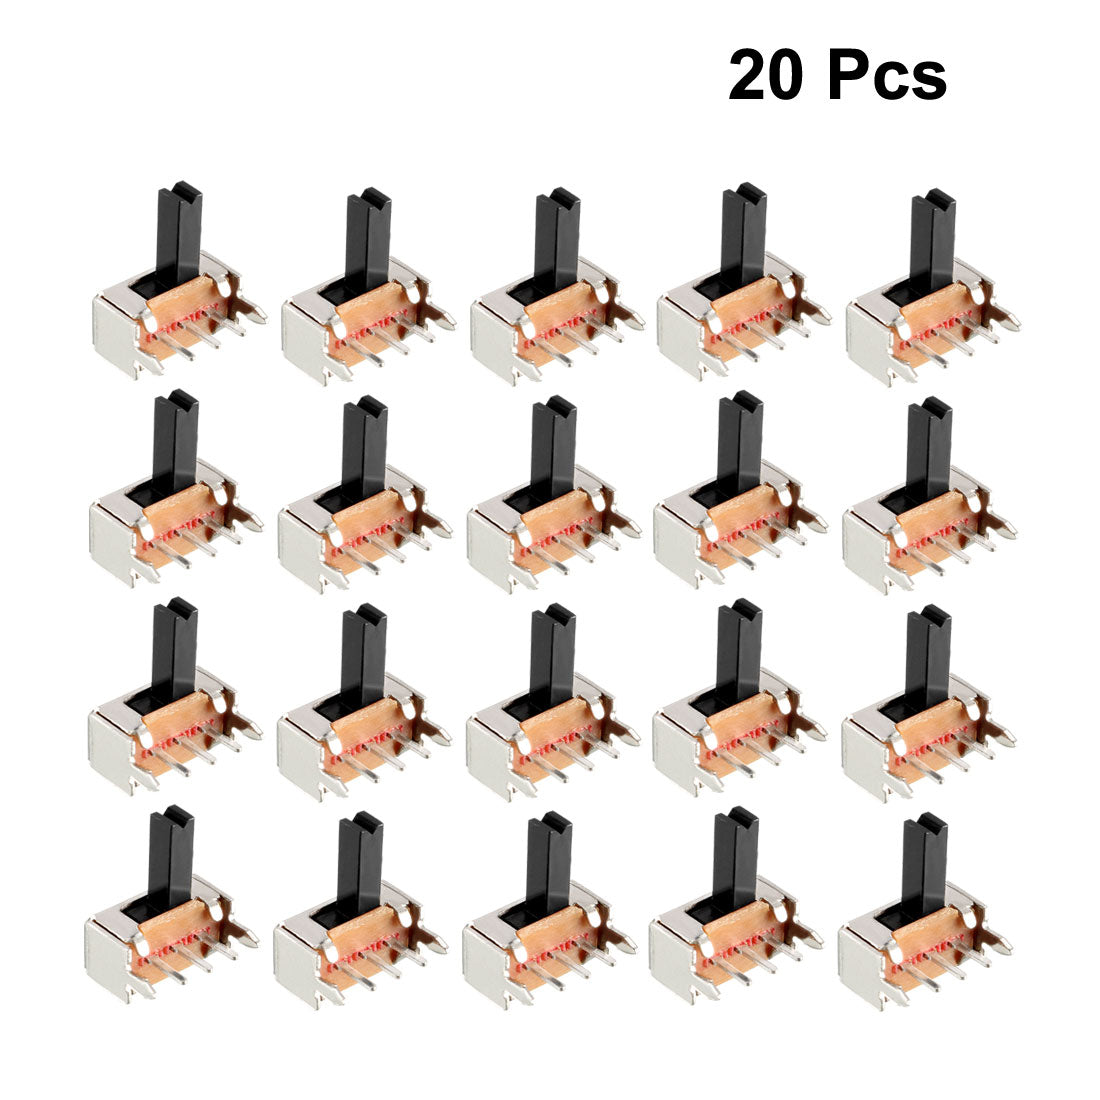 uxcell Uxcell 20Pcs 6mm Horizontal Slide Switch SPDT 1P2T 3 Terminals PCB Panel Latching